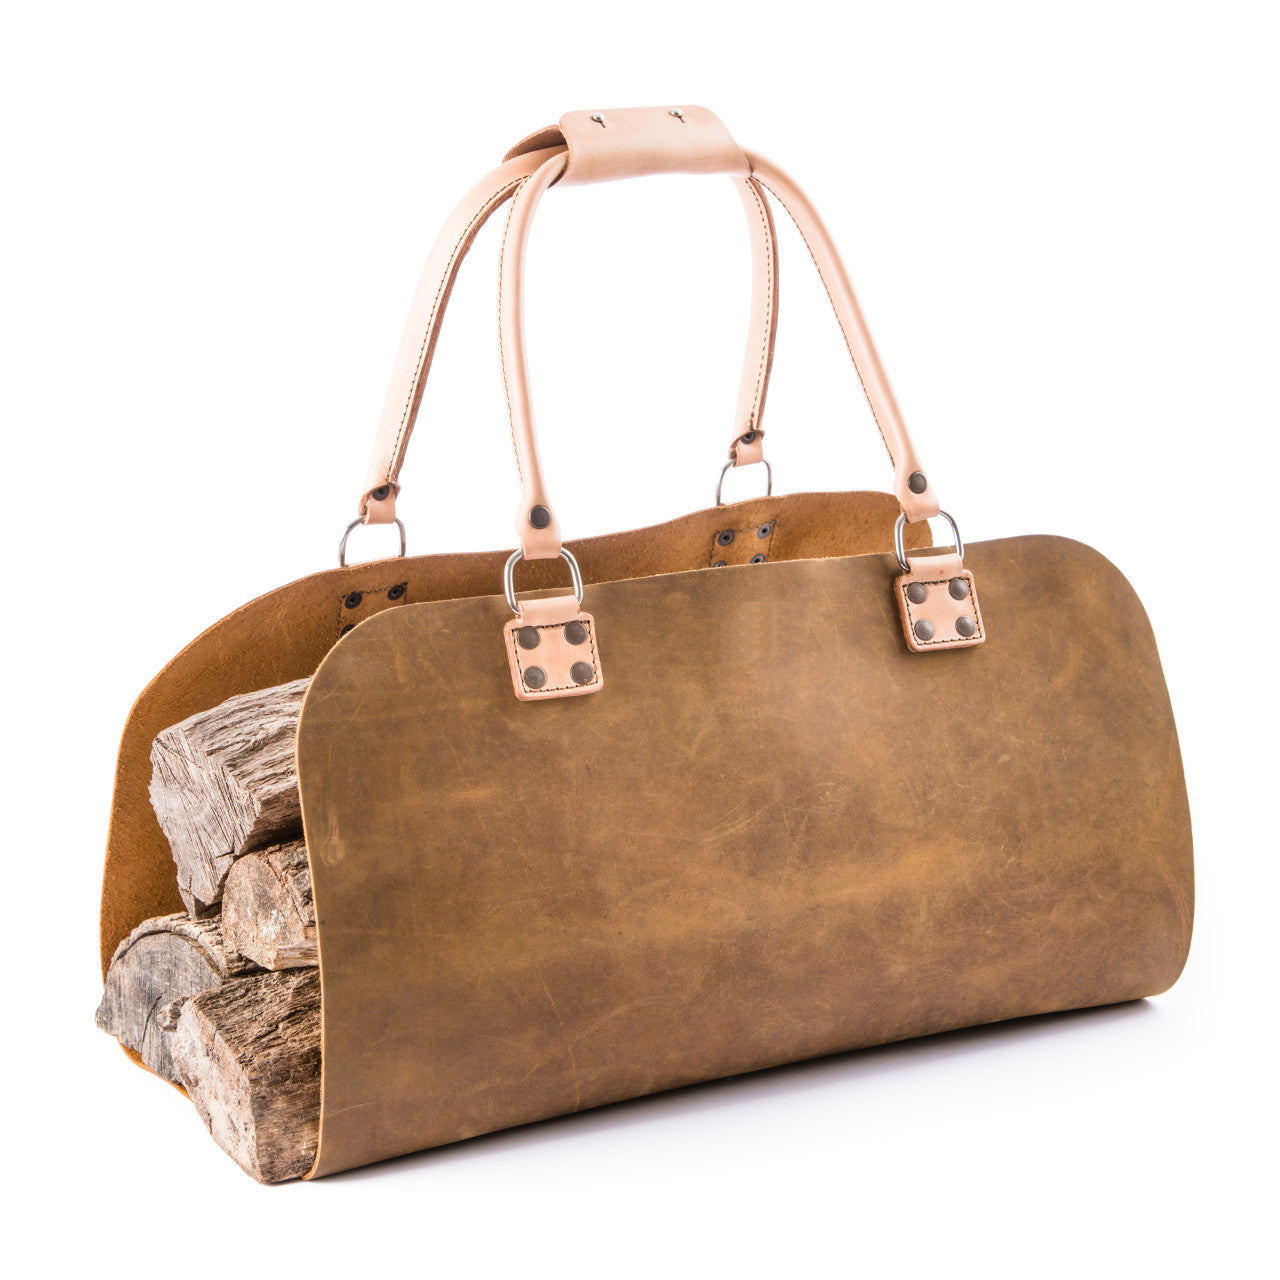 Log Carrier Tan Leather